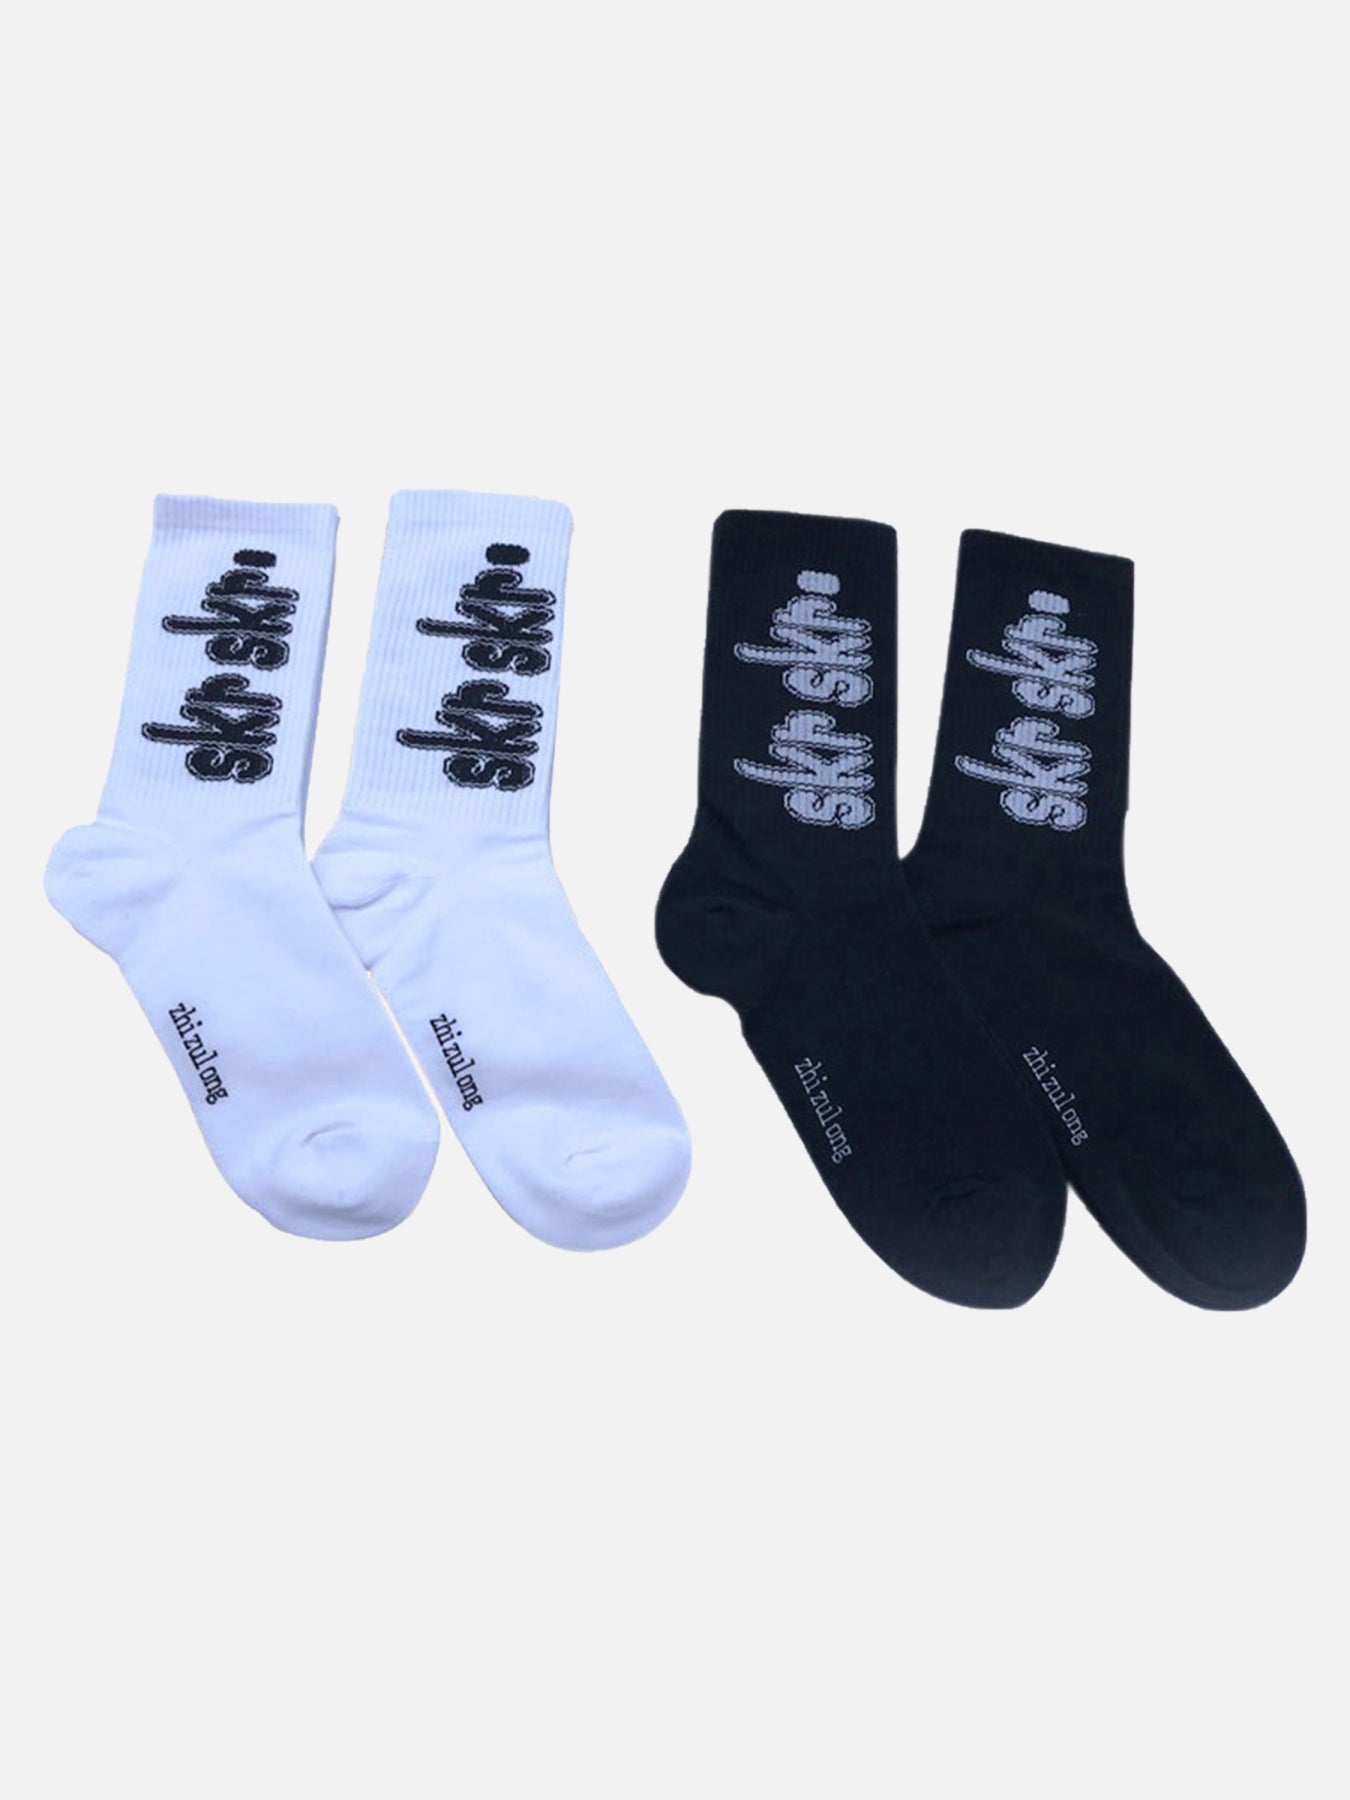 The Supermade American Hip-hop Mid-calf Socks For Couples